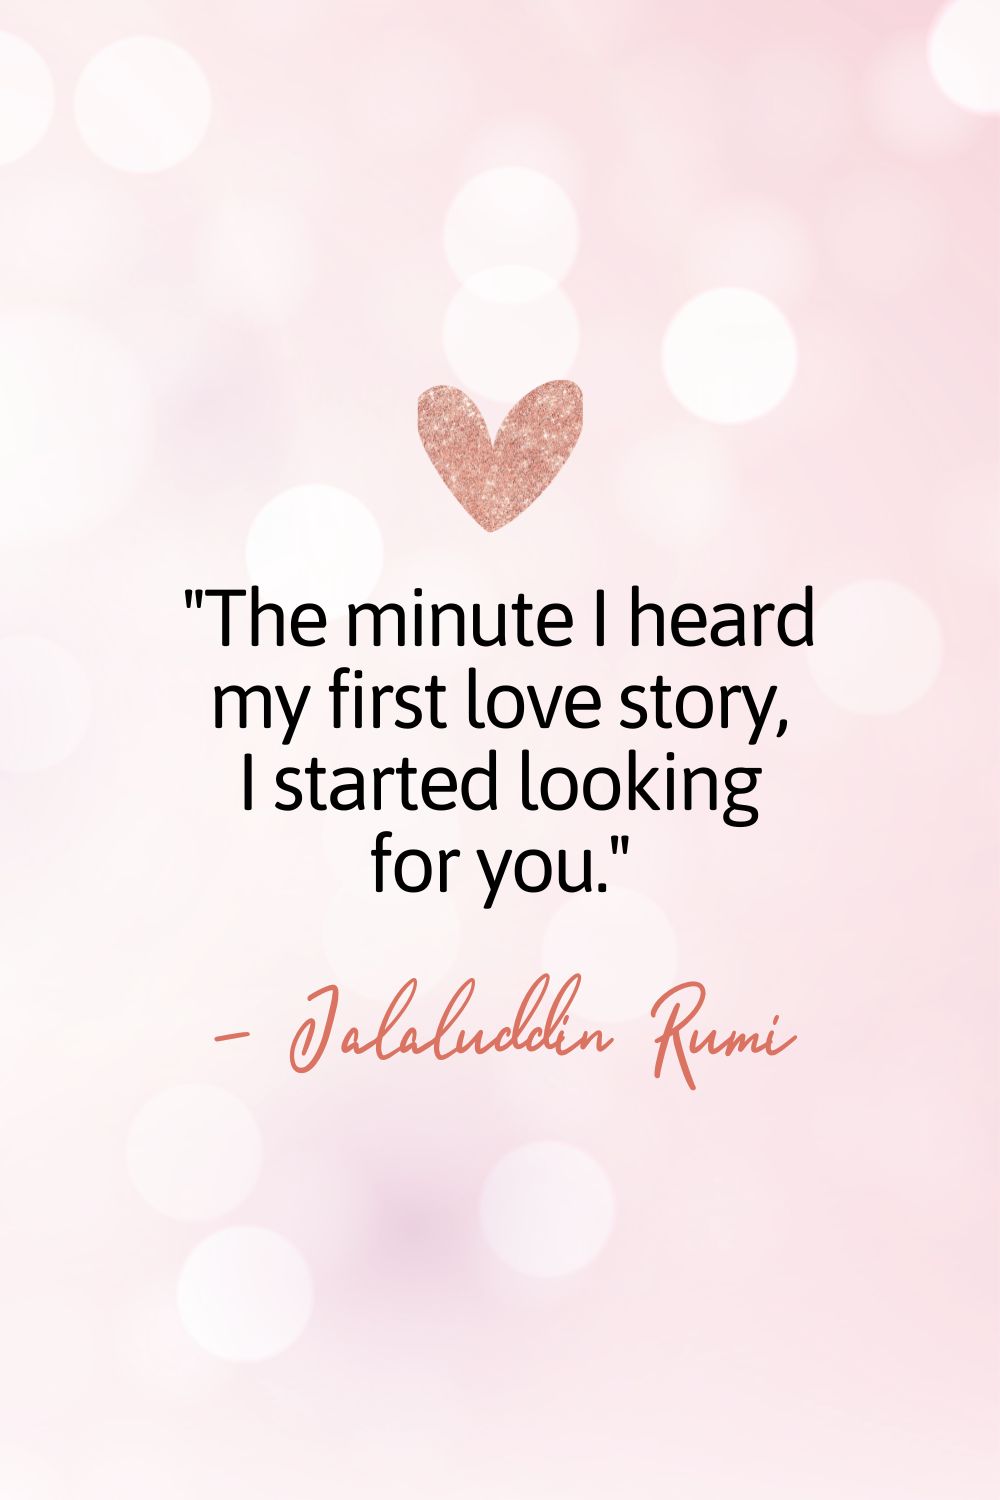 The minute I heard my first love story, I started looking for you